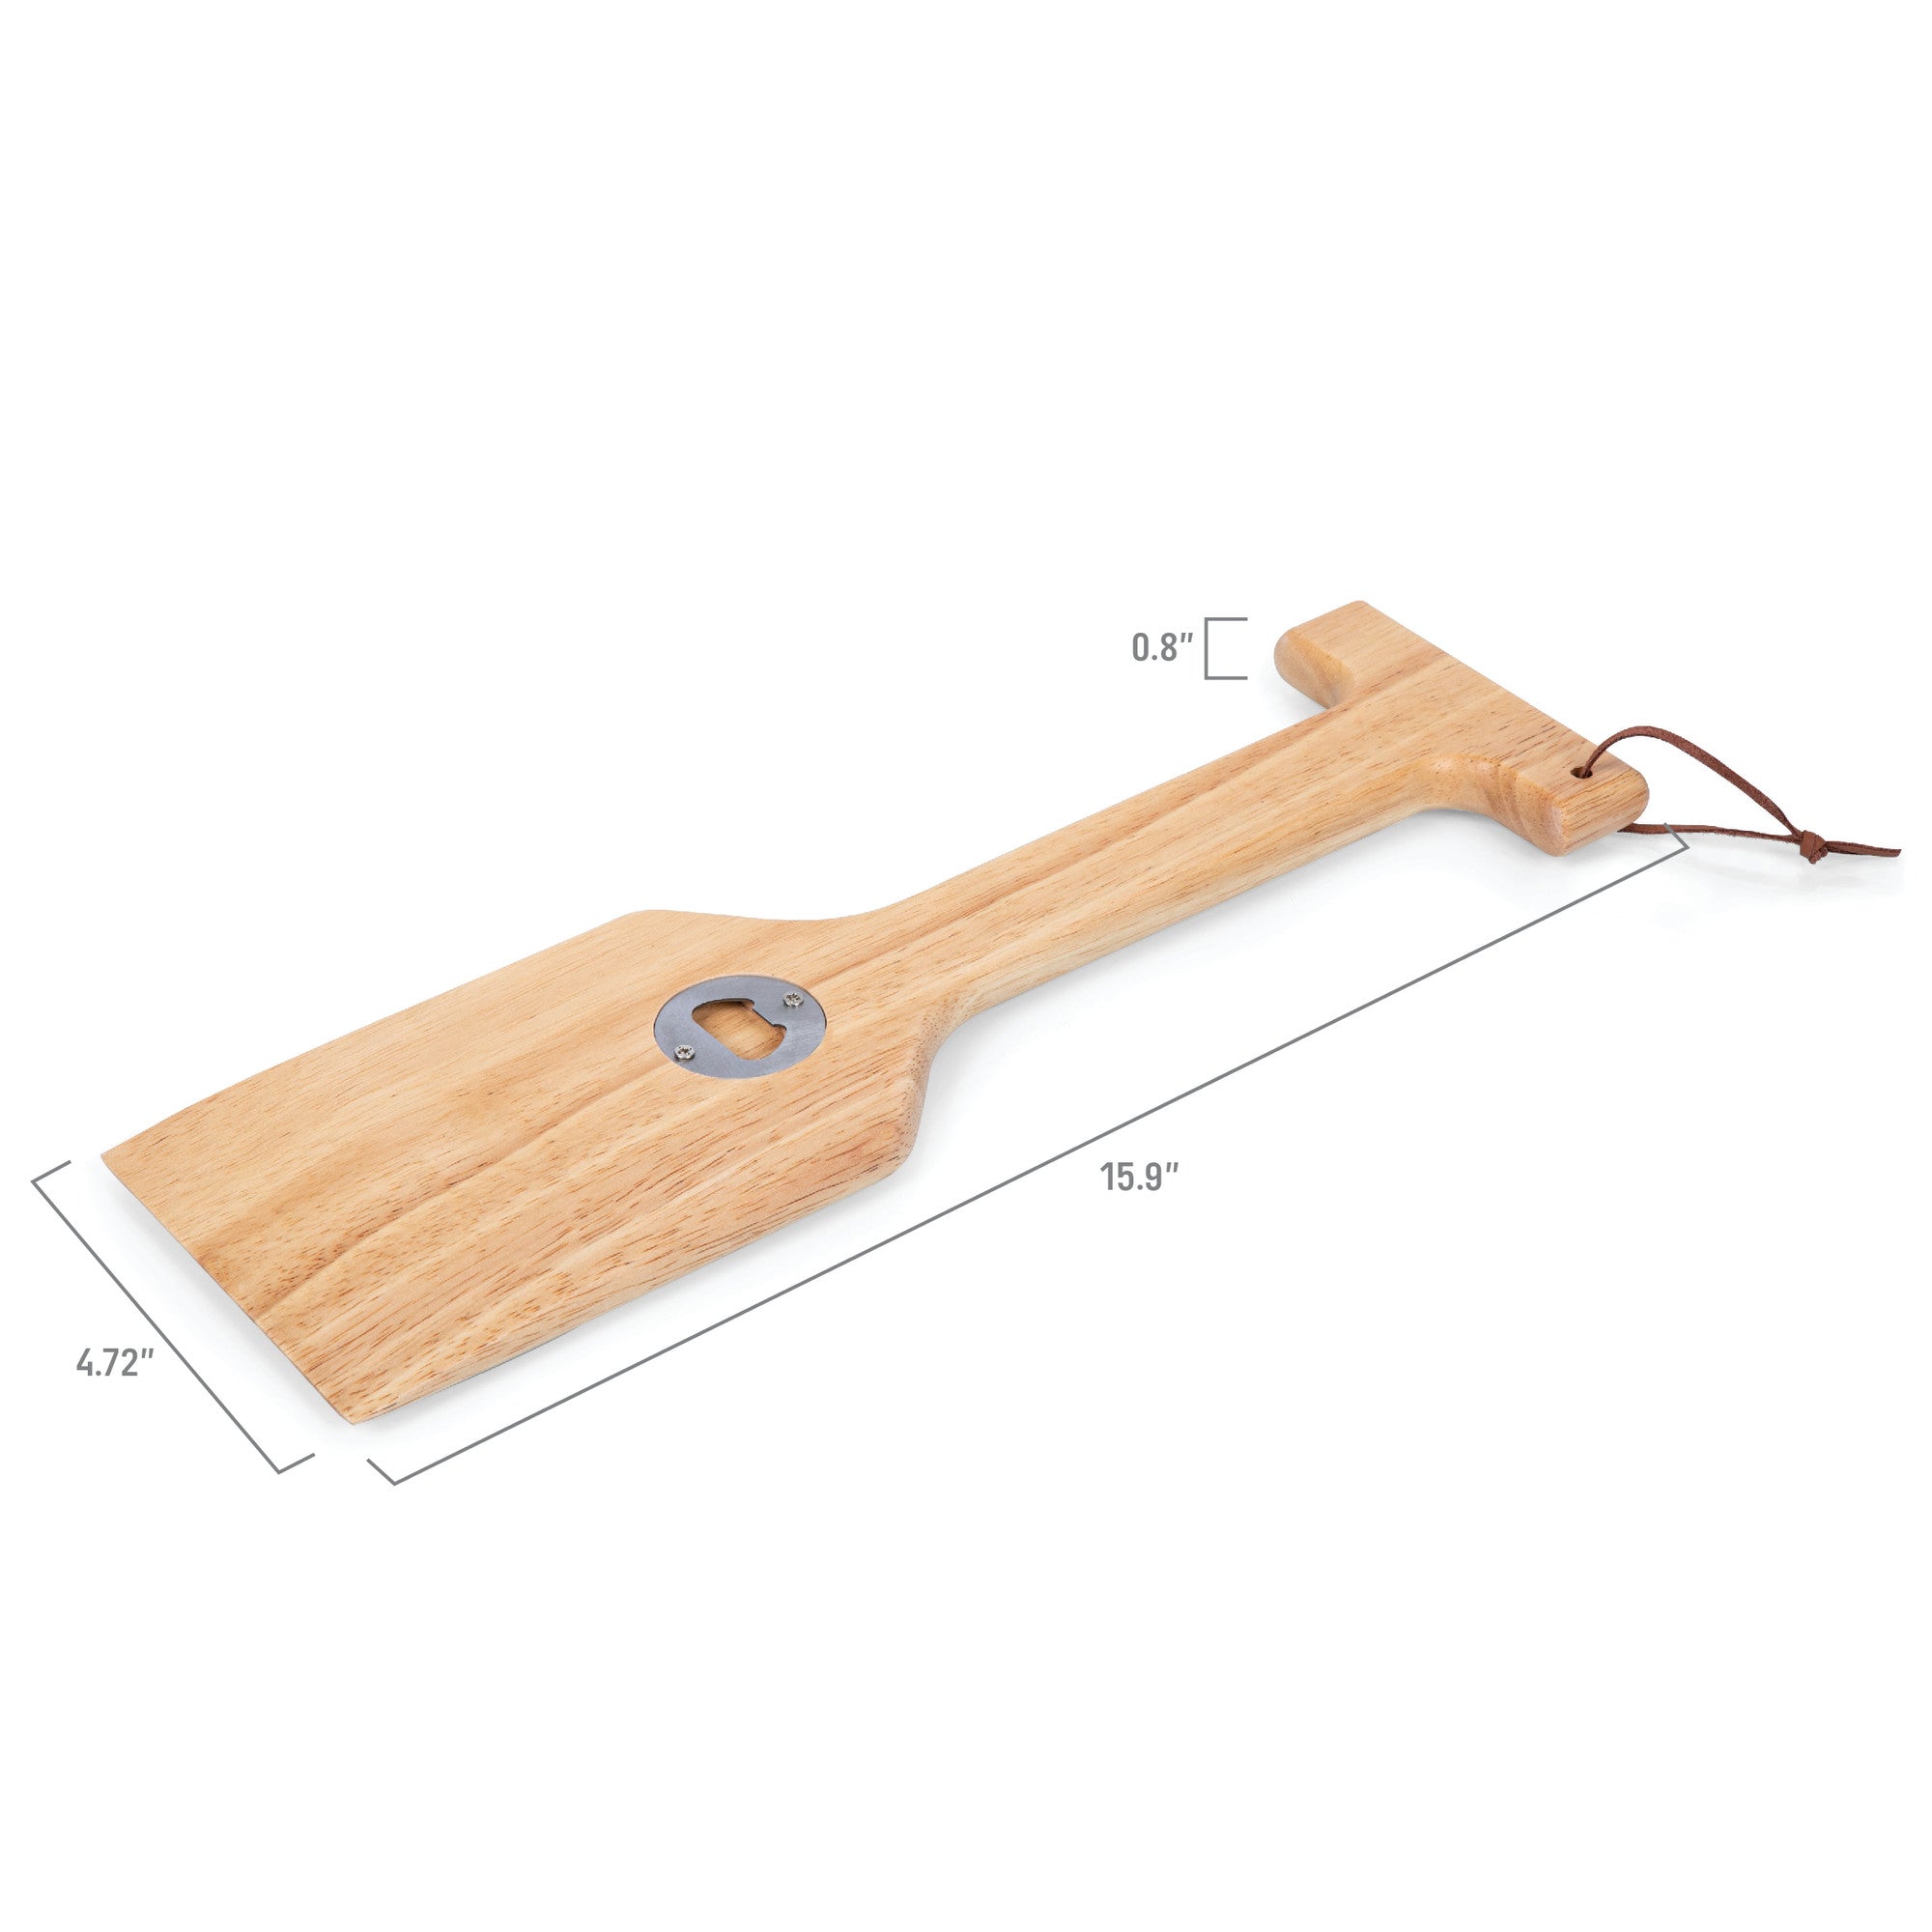 Texas A&M Aggies - Hardwood BBQ Grill Scraper with Bottle Opener